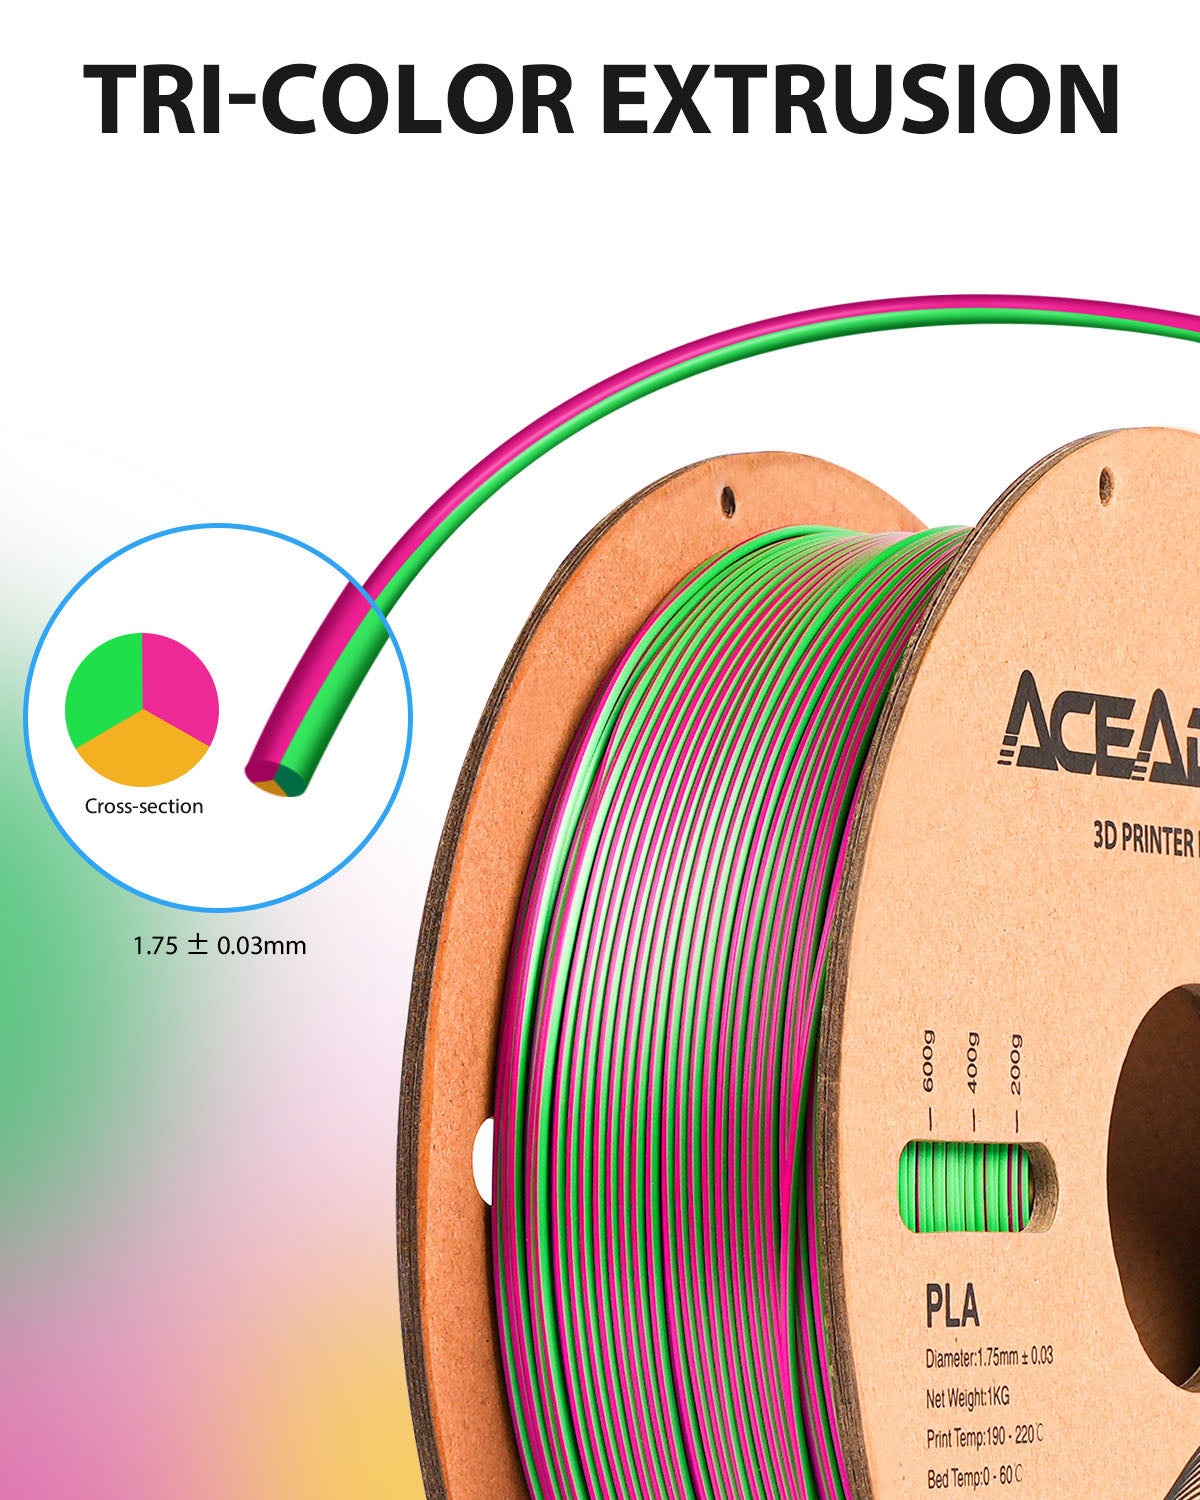 [Clearance Sale] Aceaddity Silk Multicolor PLA Get 4 at the Price of 3